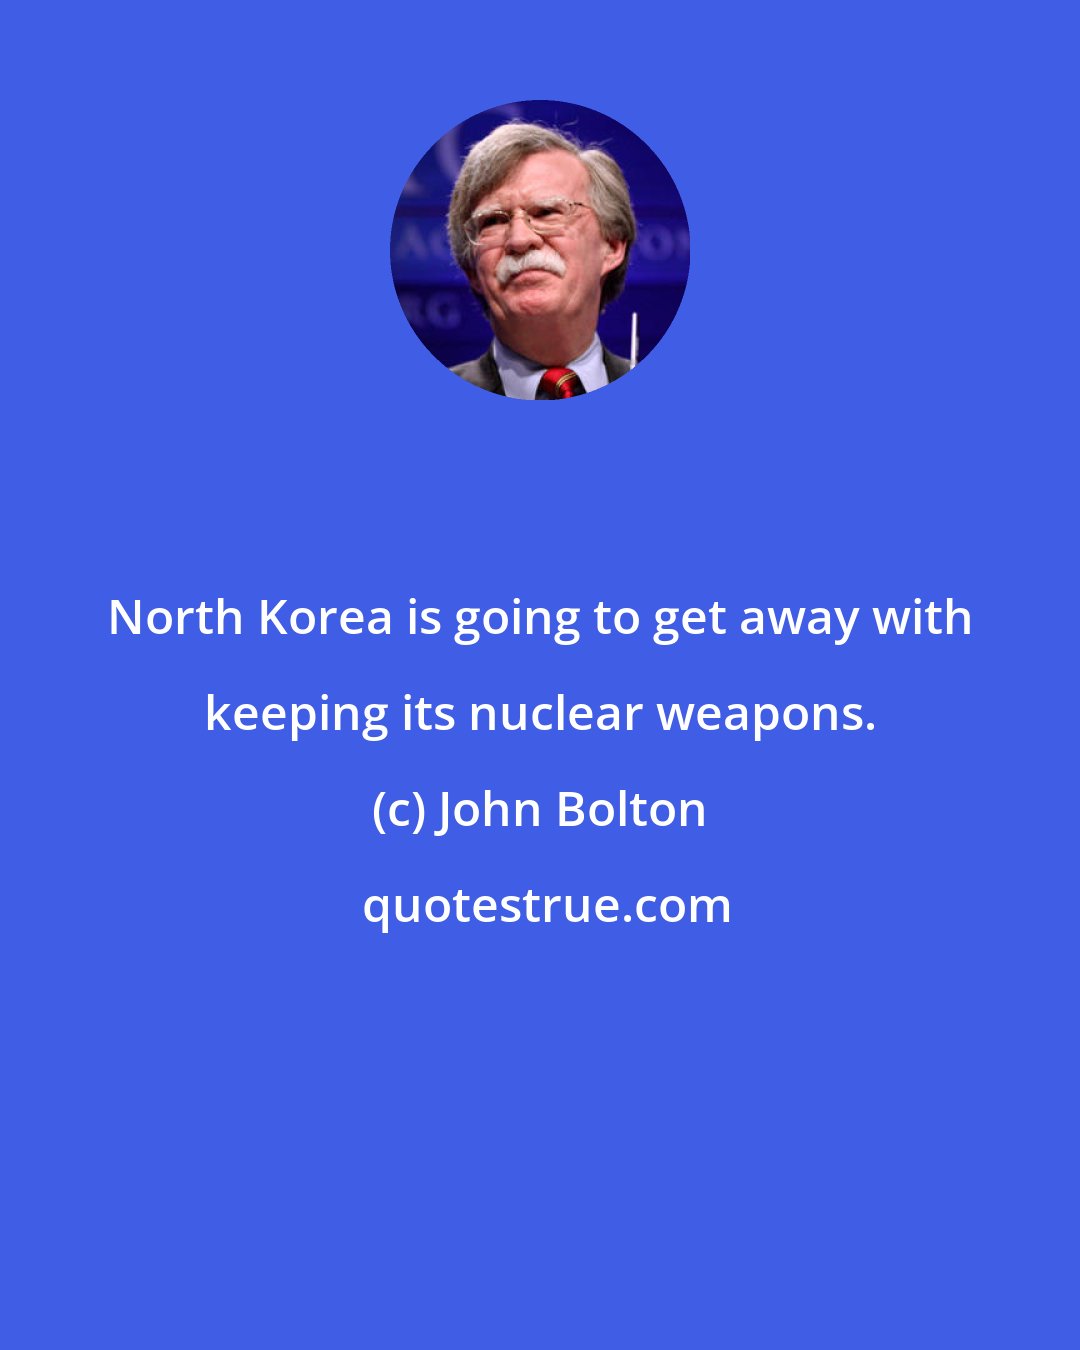 John Bolton: North Korea is going to get away with keeping its nuclear weapons.